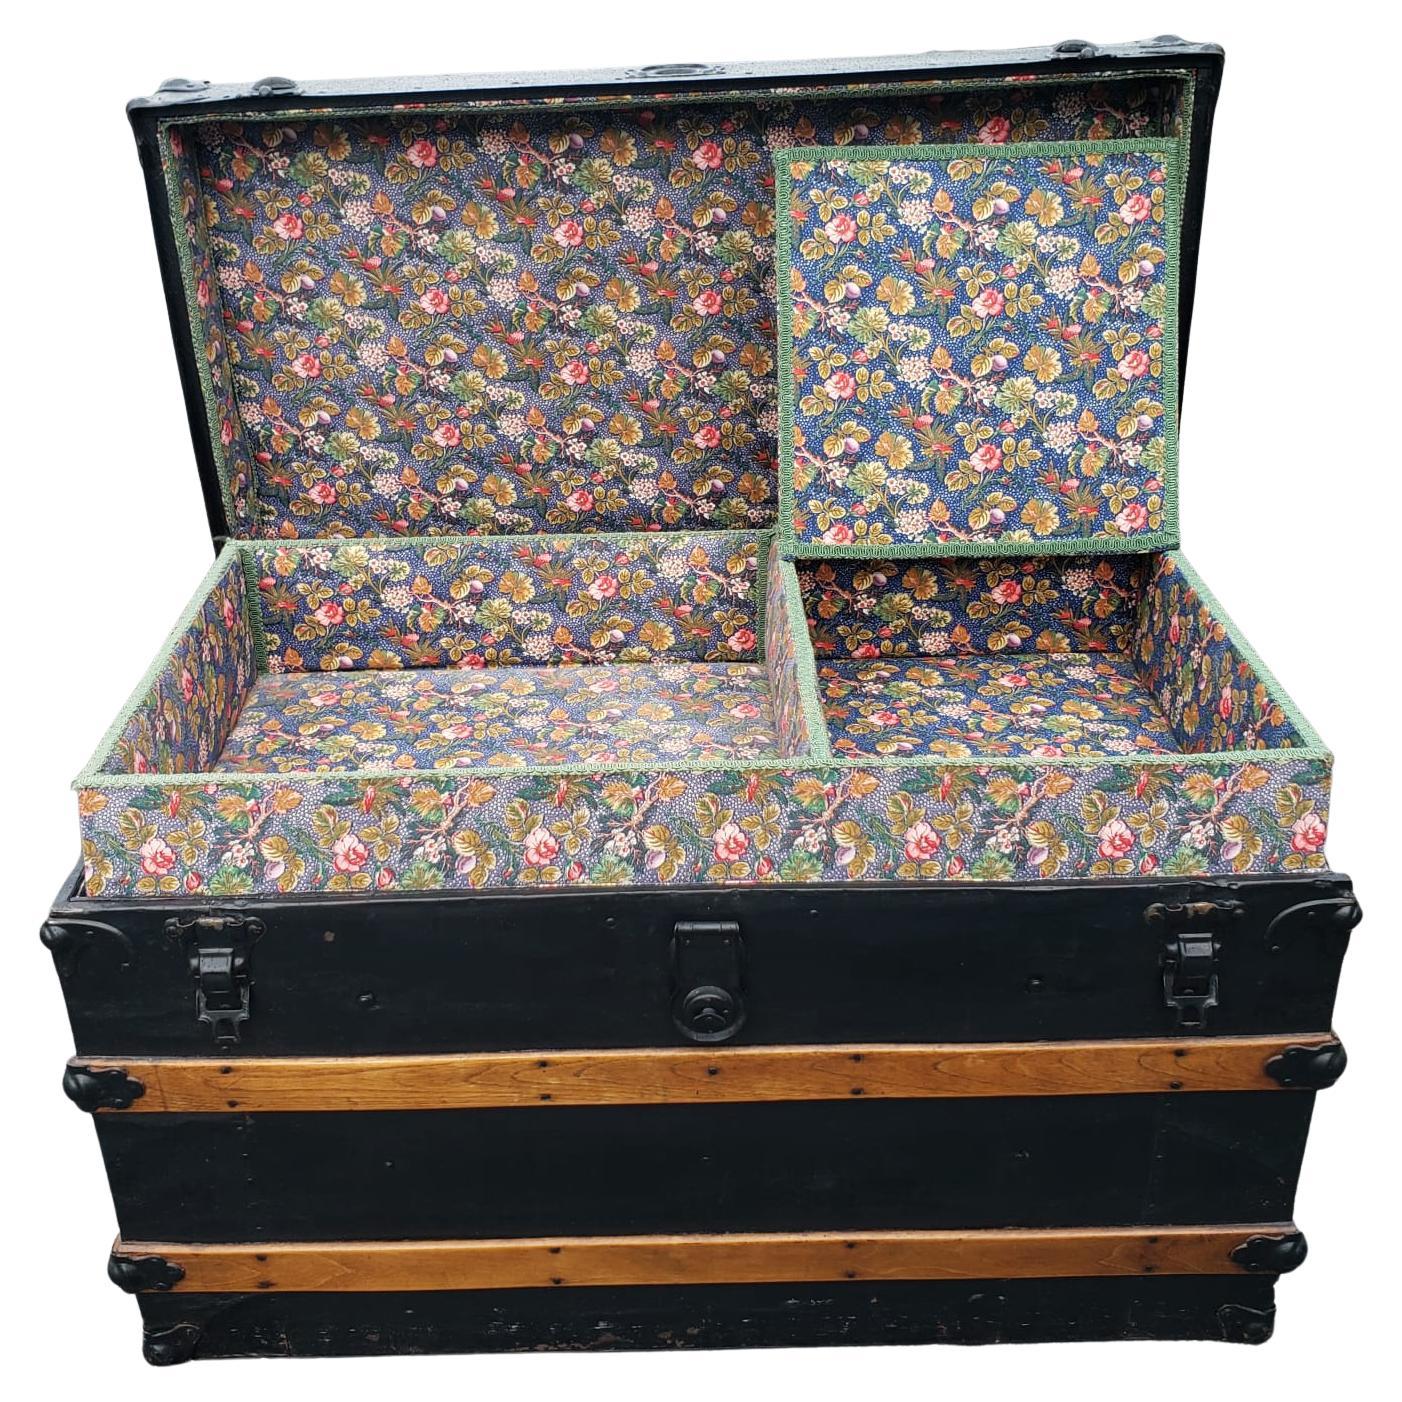 American Craftsman Antique American Refinished and Re-Upholstered Blanket Trunk Chest